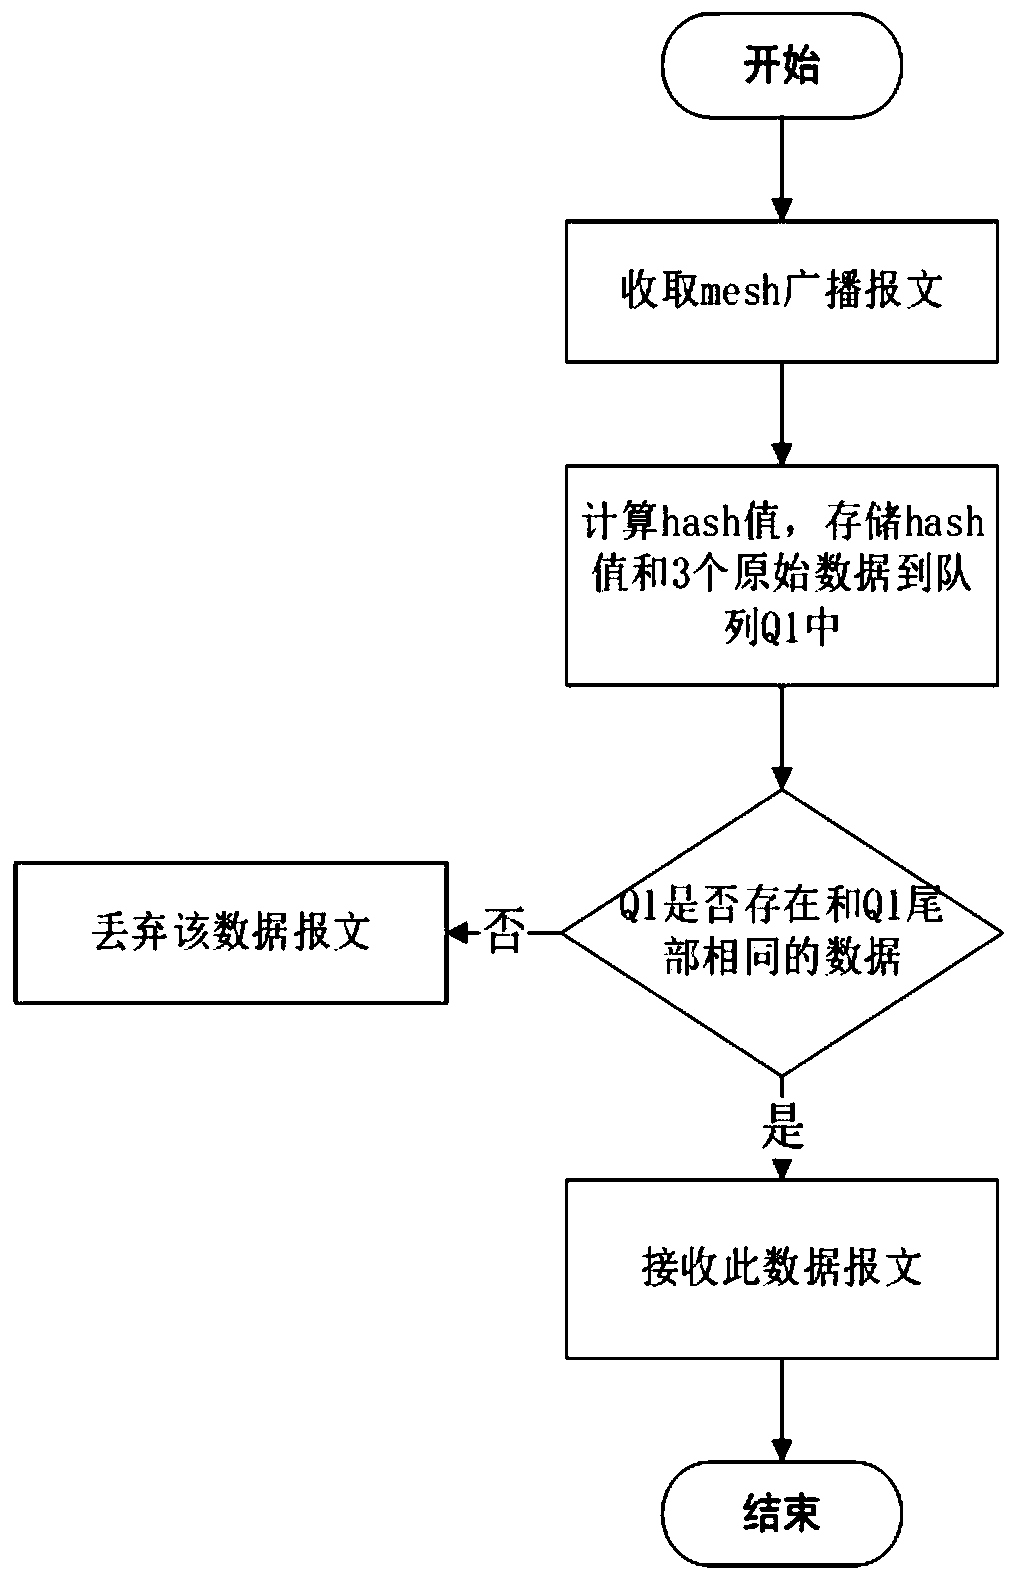 Broadcast bearing layer message filtering strategy method based on SIG mesh